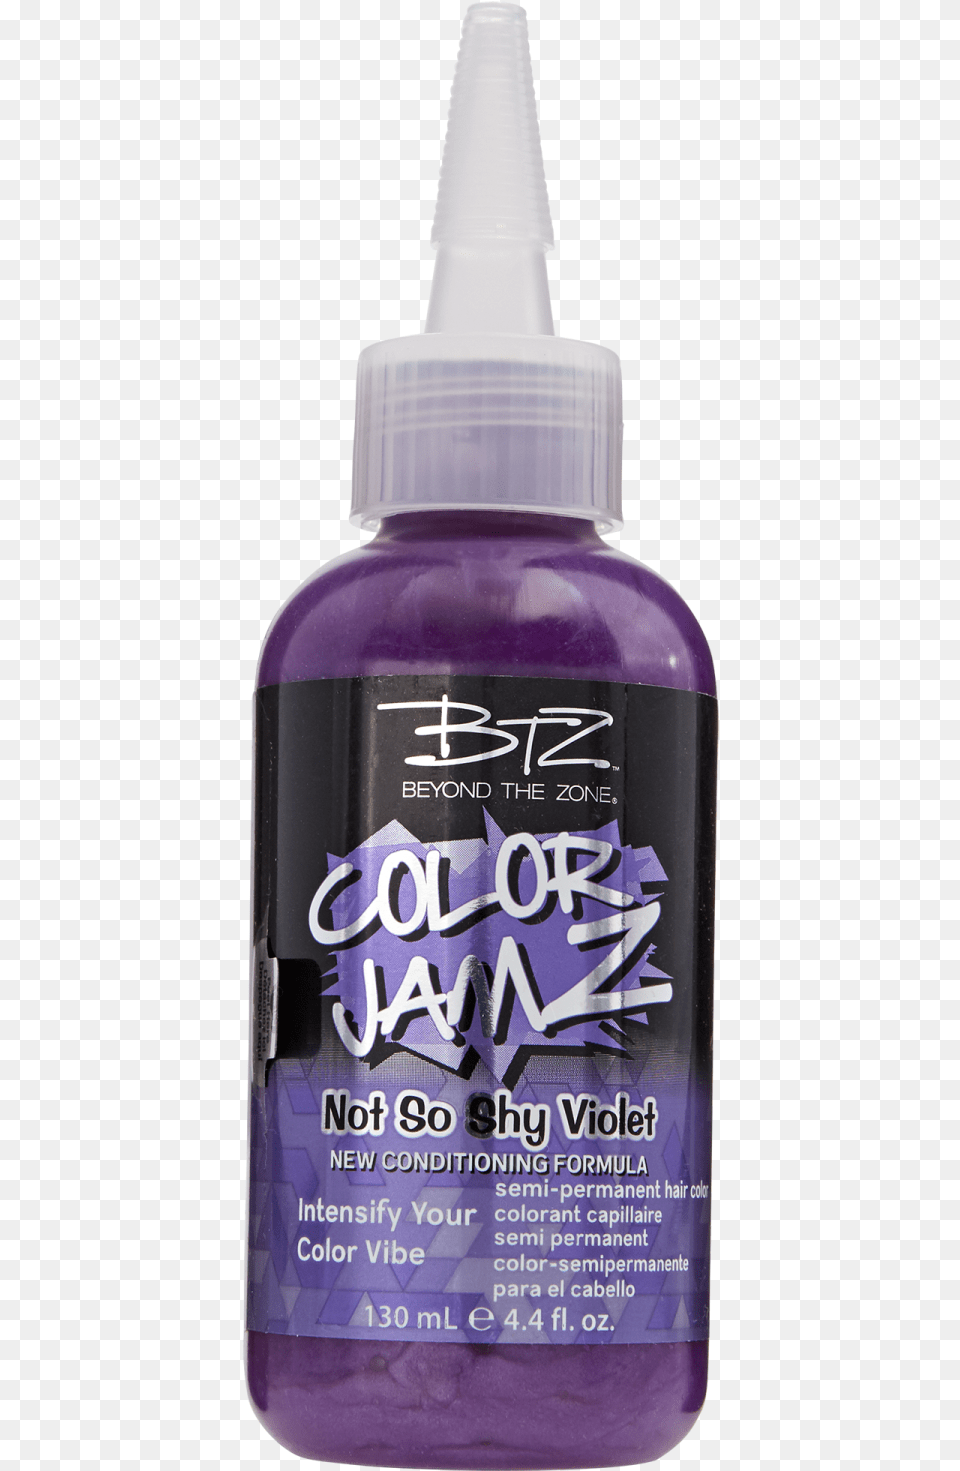 Not So Shy Violet Not So Shy Violet Semi Permanent Hair Color 42 Oz, Purple, Bottle, Cosmetics, Perfume Free Transparent Png